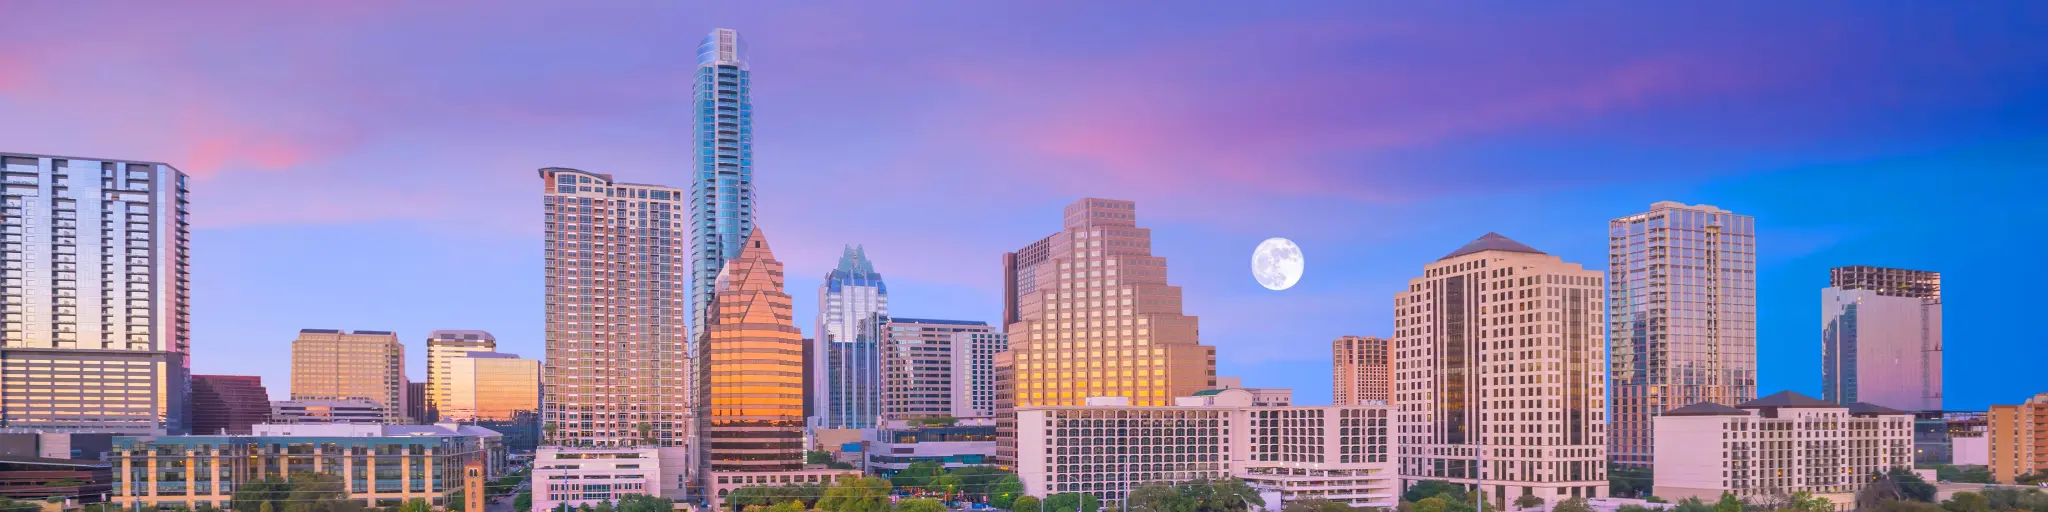 Downtown Austin skyline after sunset, purple sky with a full moon